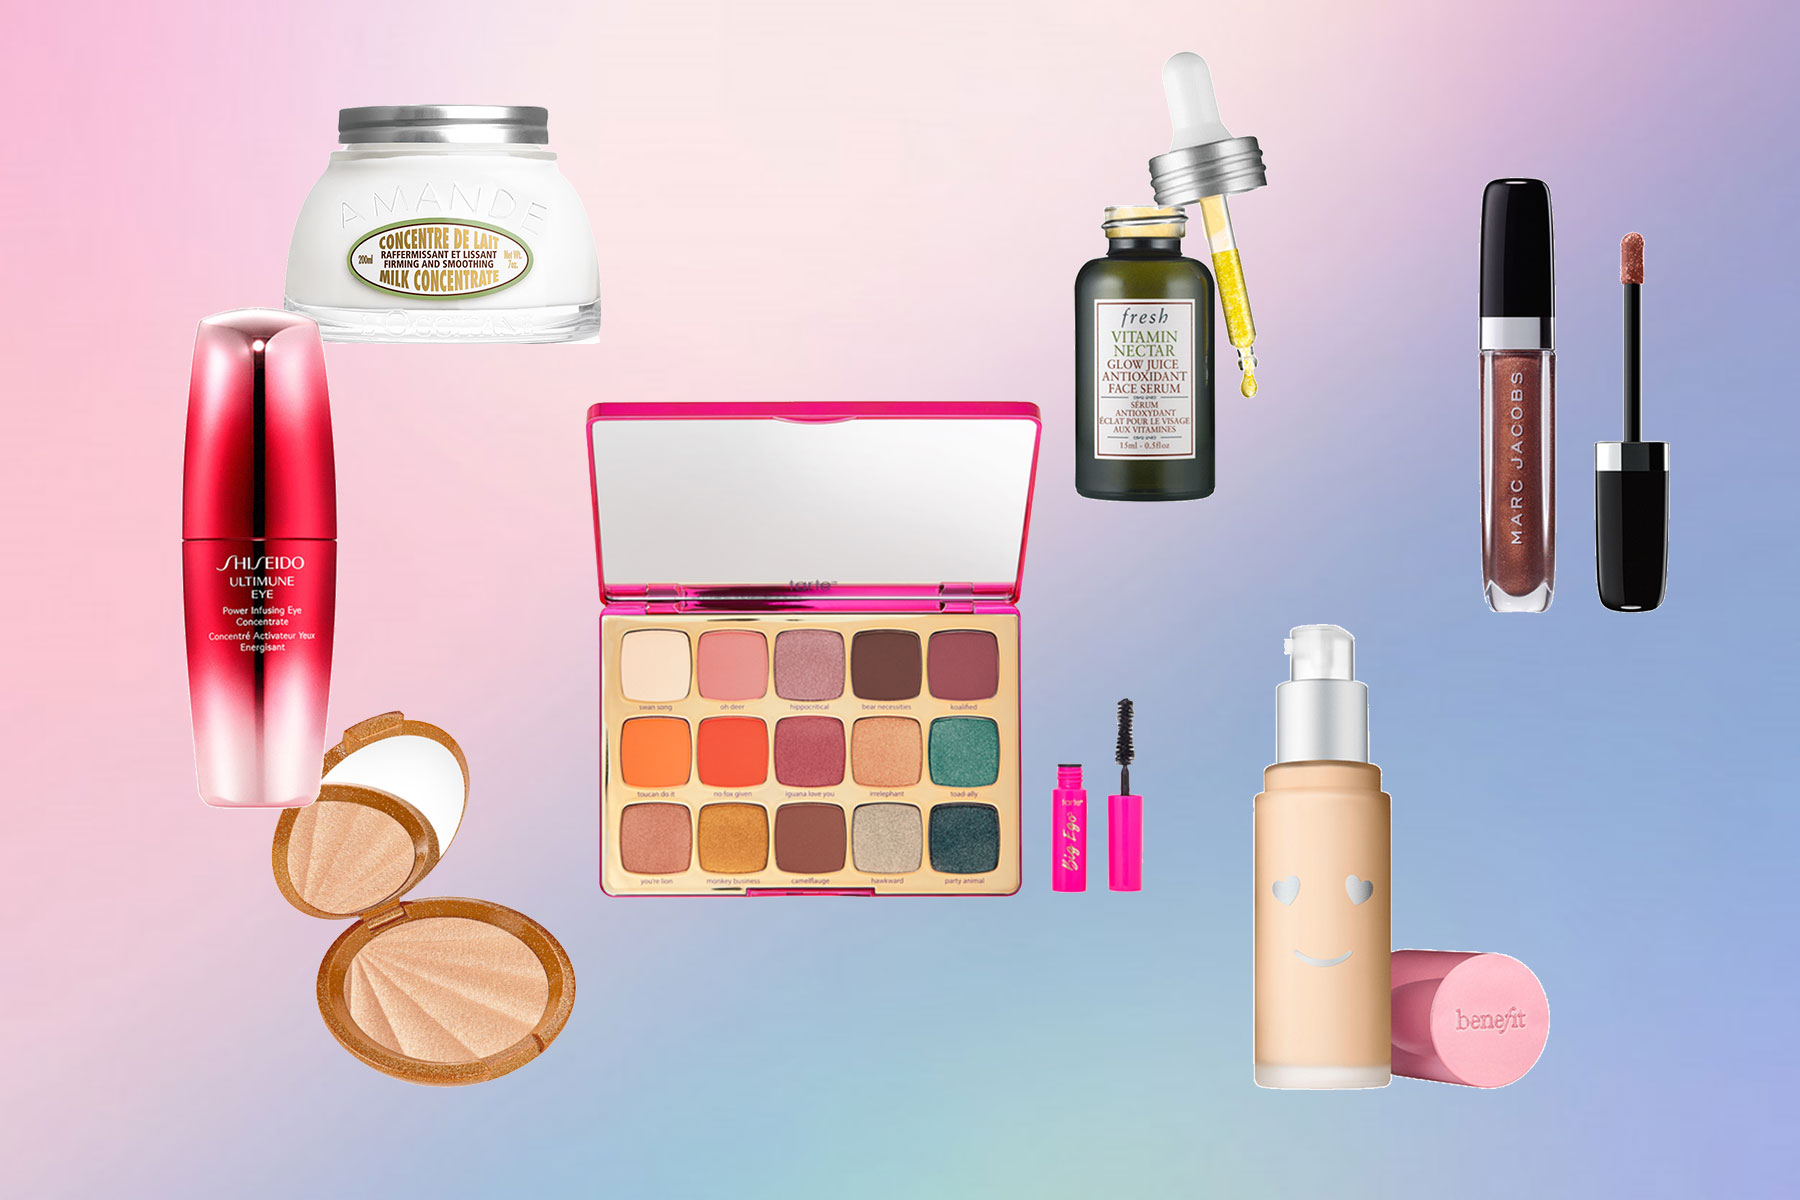 July 2019 beauty launches